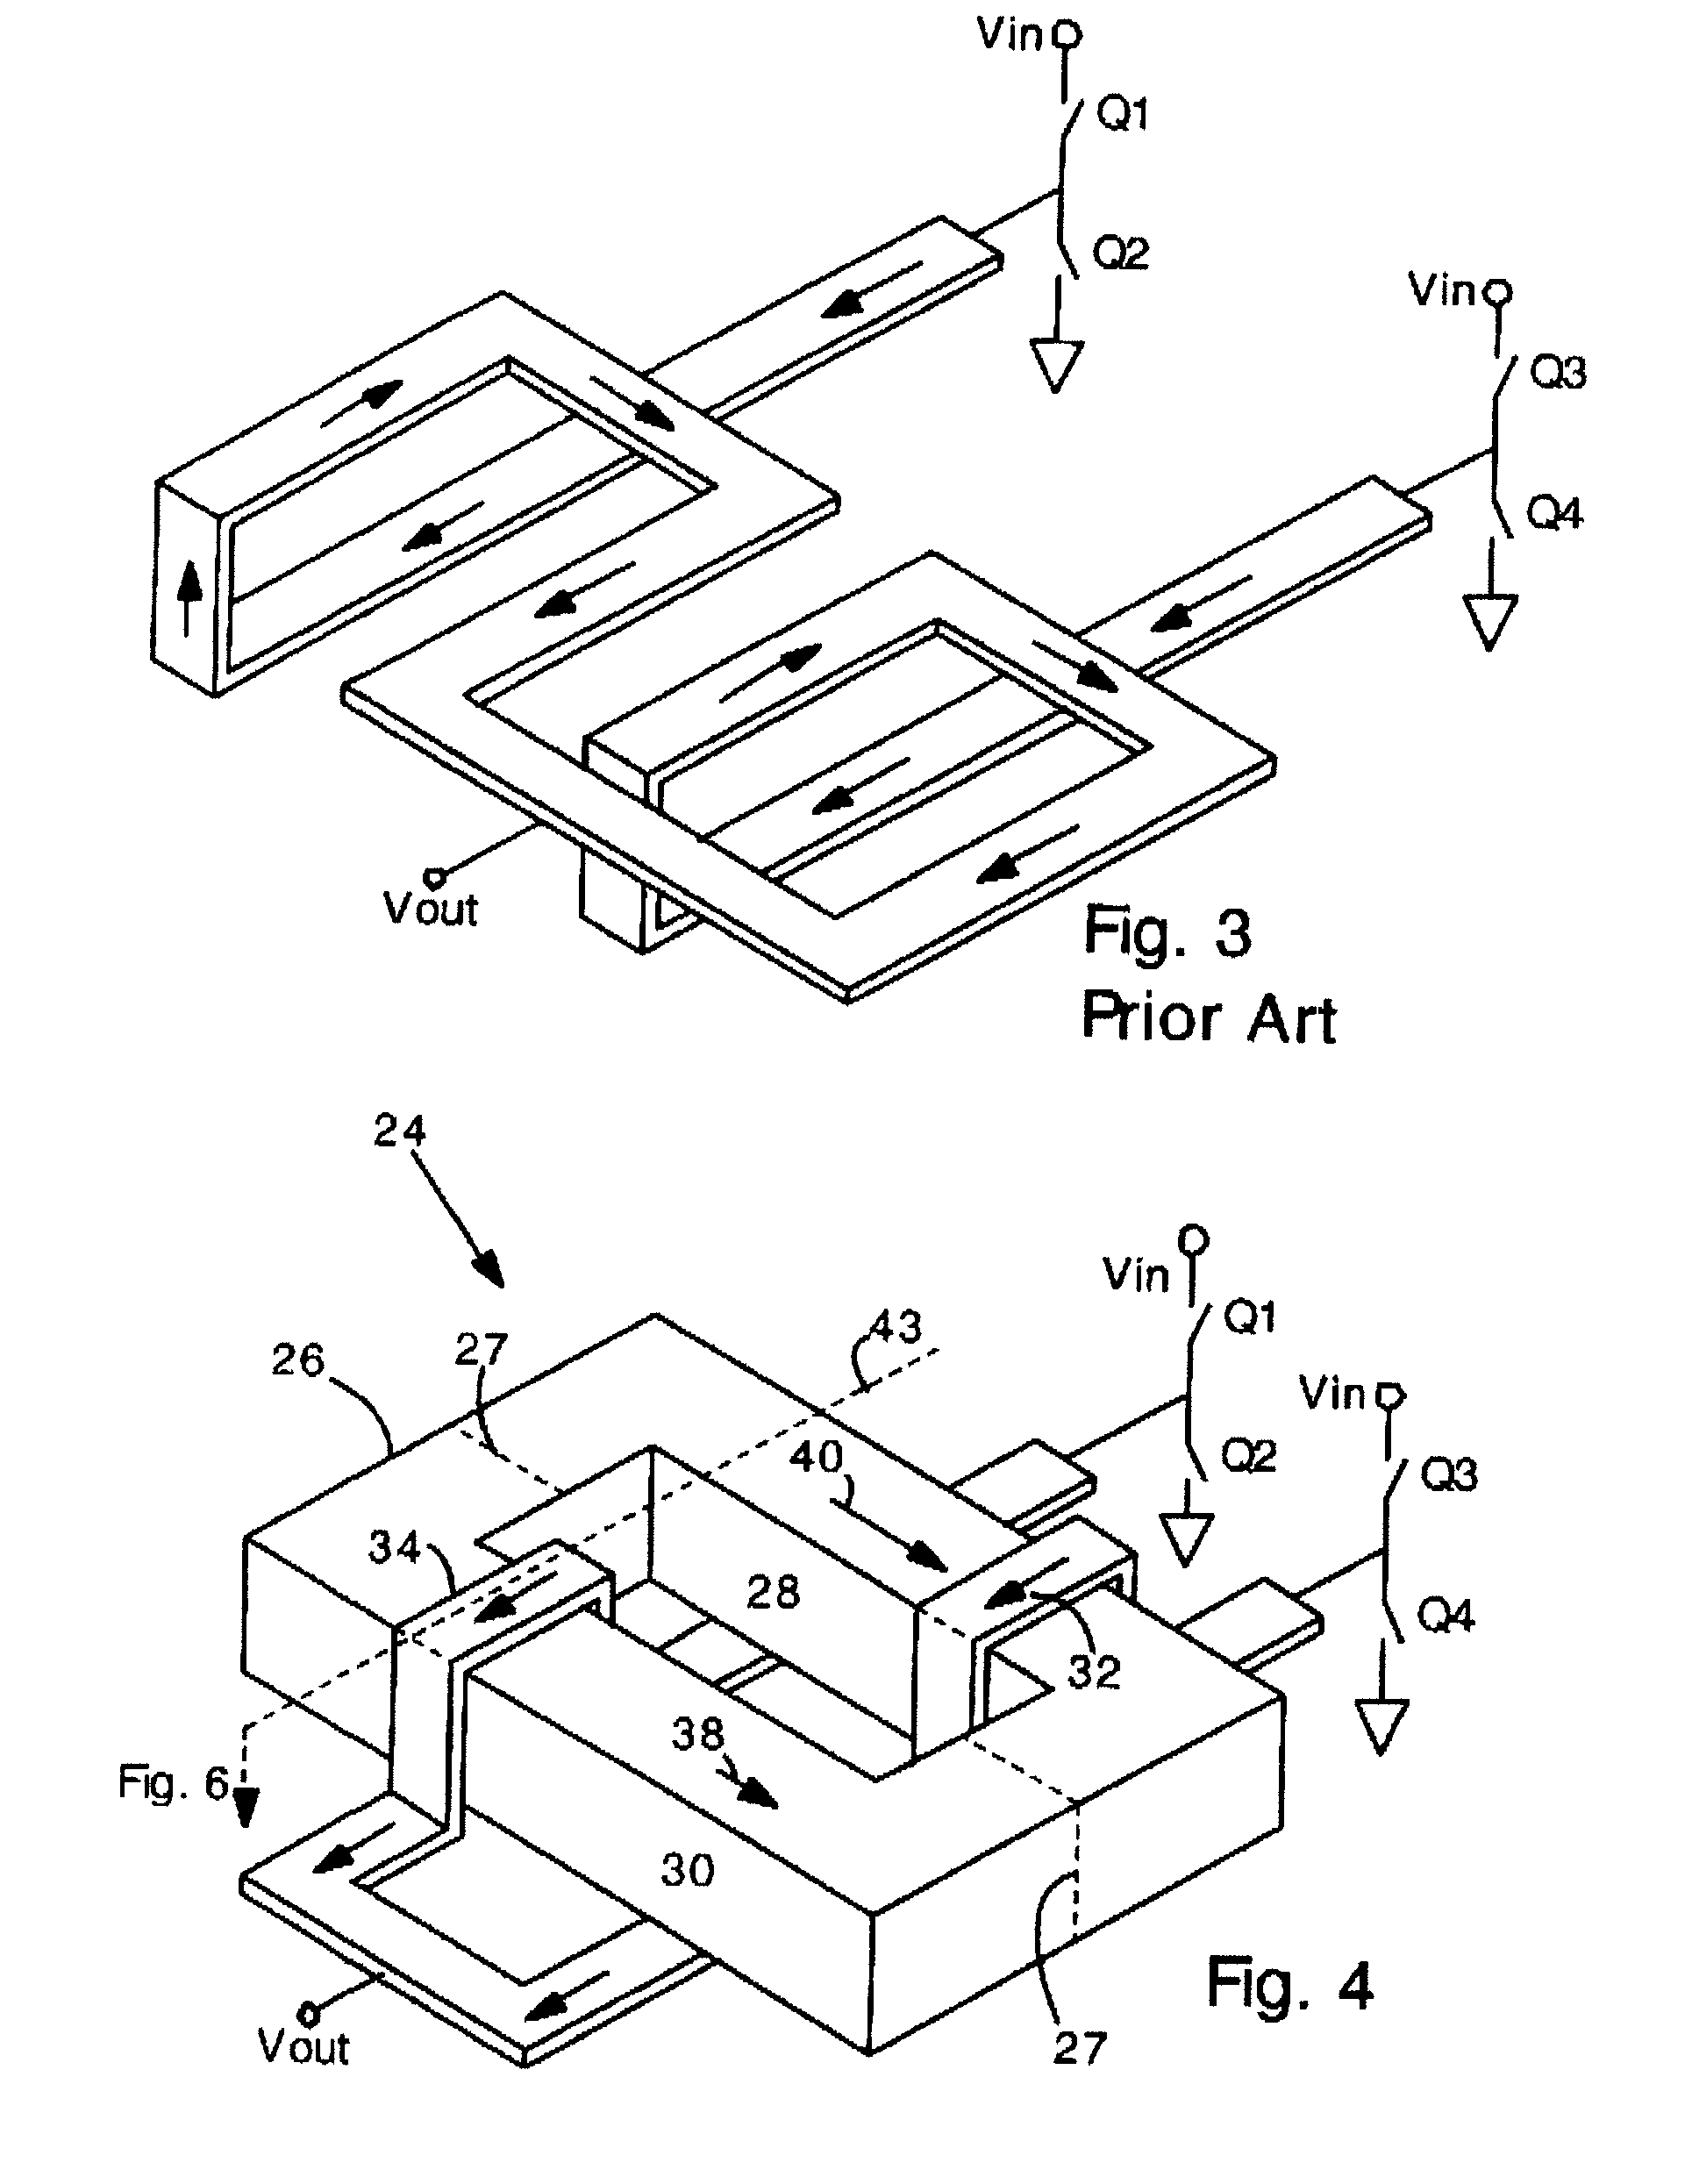 Multiphase voltage regulator having coupled inductors with reduced winding resistance